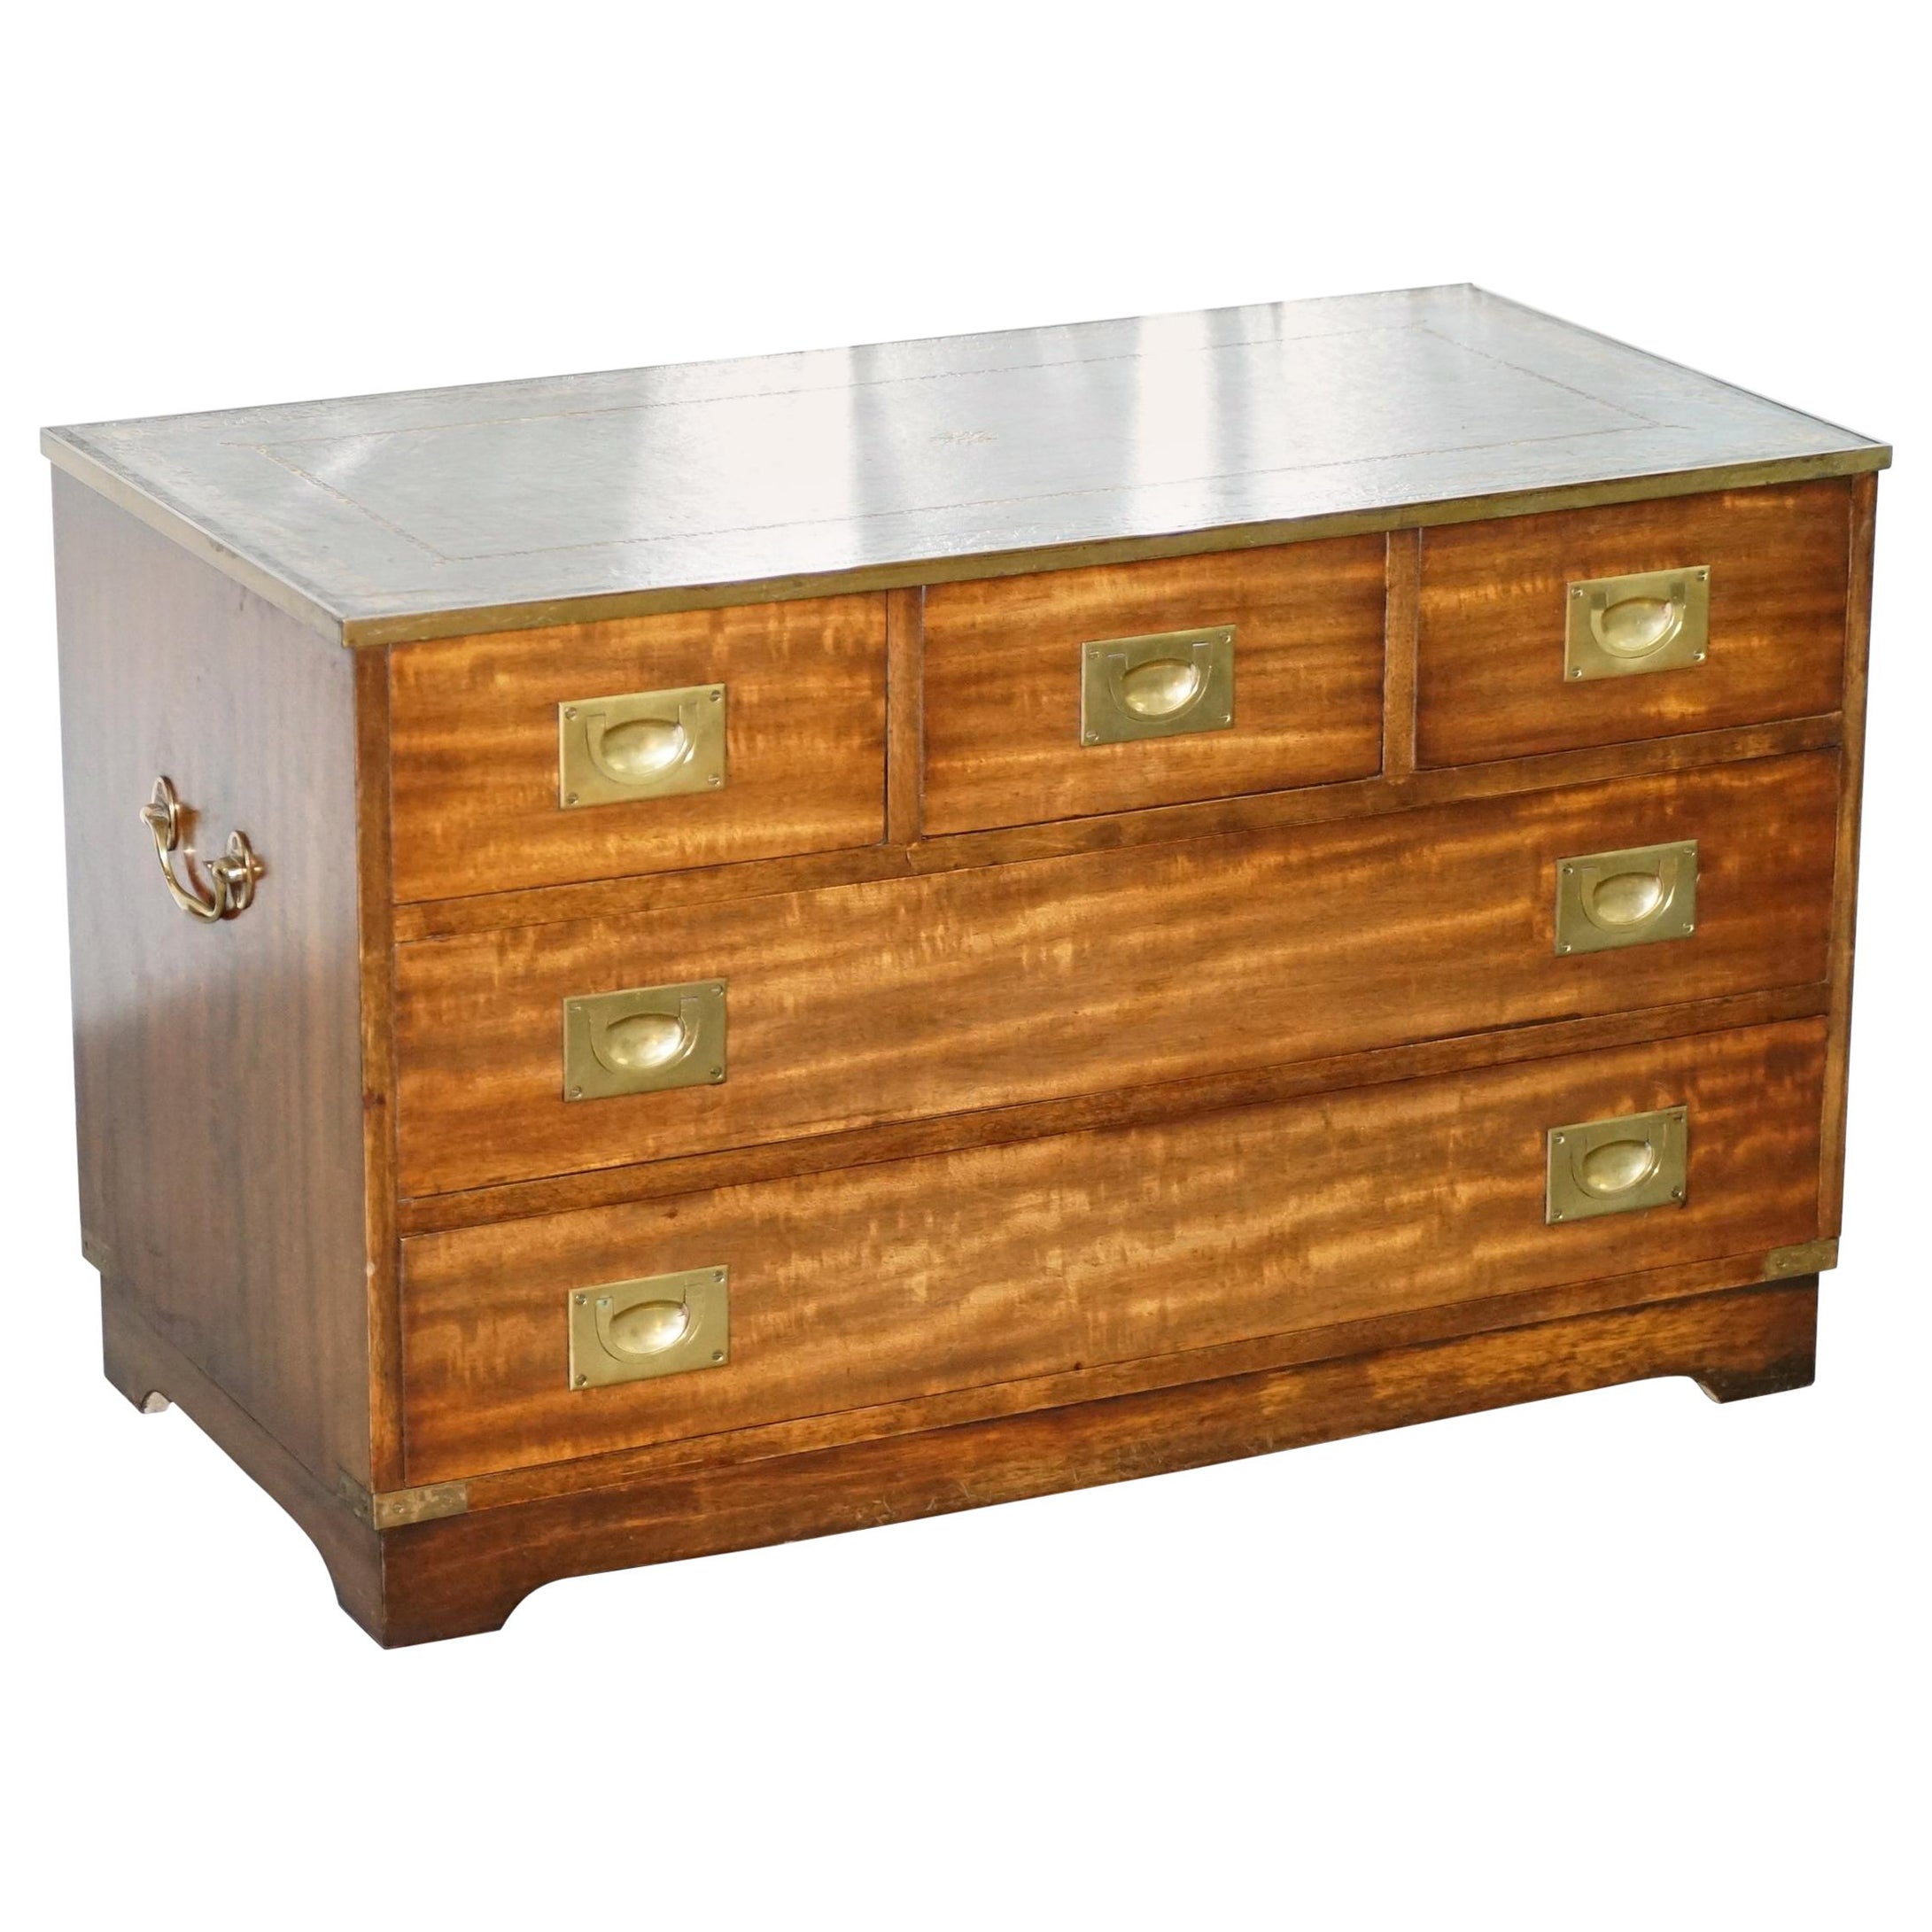 Bevan Funnell Reprodux Campaign Chest of Drawers Leather Top TV Stand For Sale